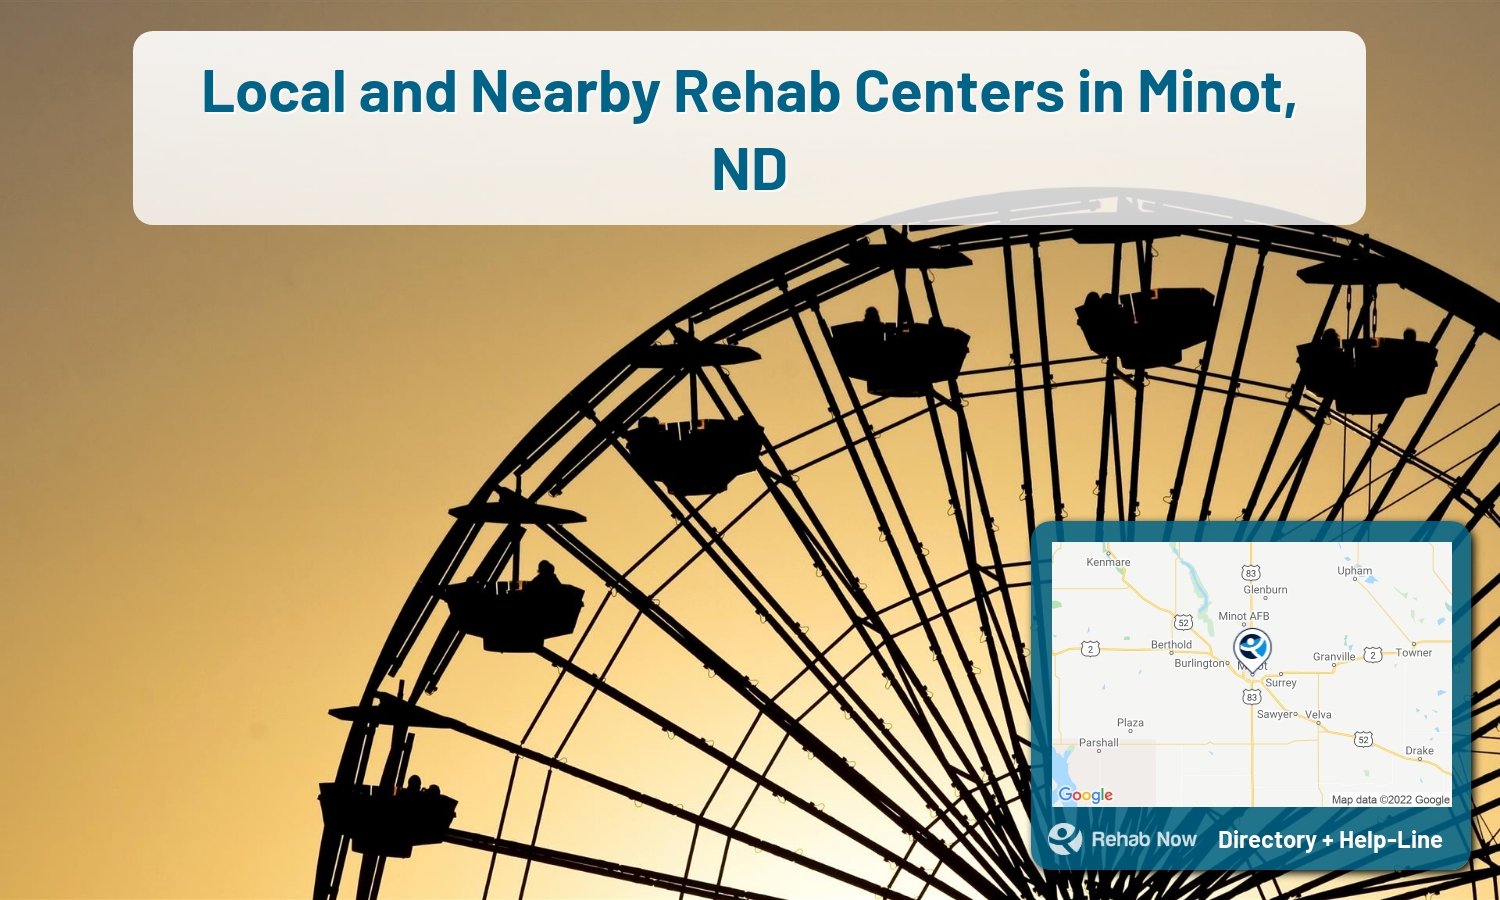 Minot, ND Treatment Centers. Find drug rehab in Minot, North Dakota, or detox and treatment programs. Get the right help now!